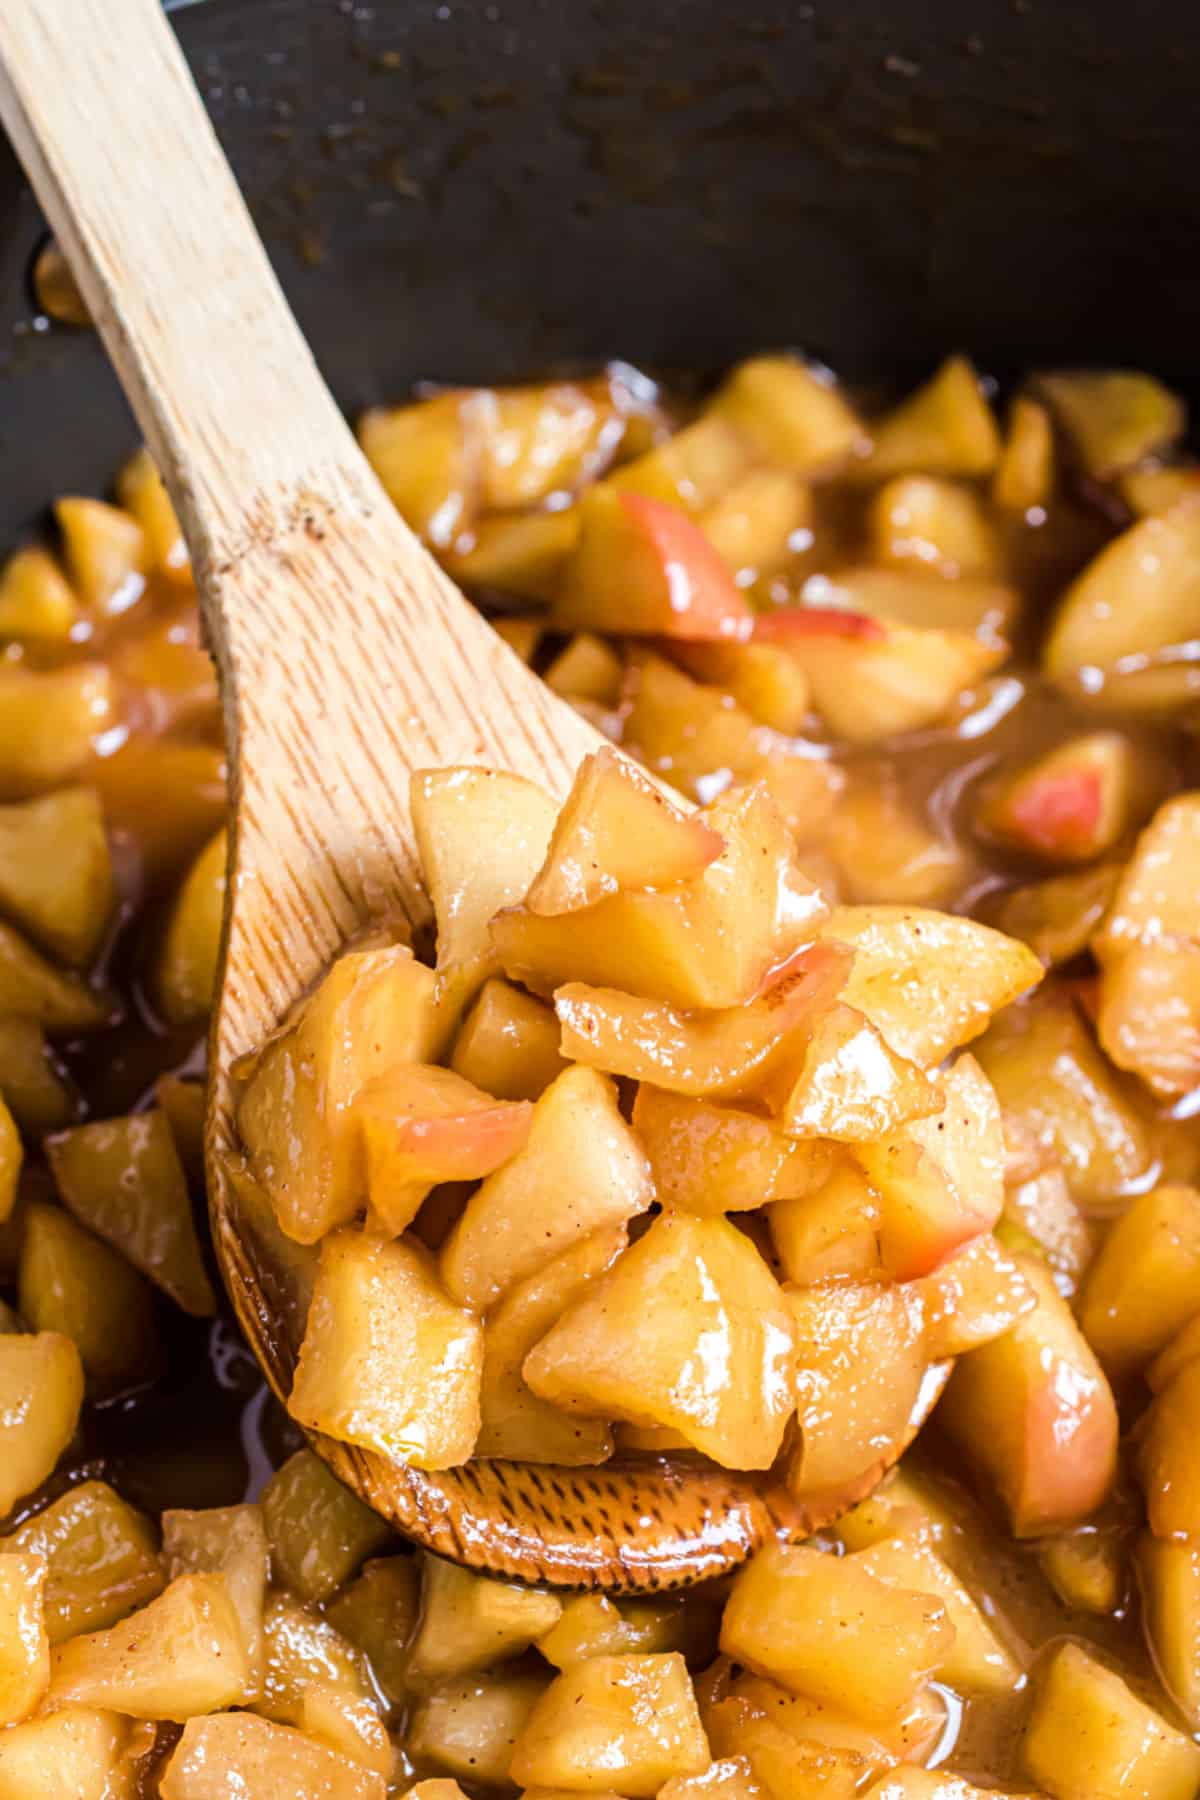 Cinnamon fried apples in skillet with wooden spoon.